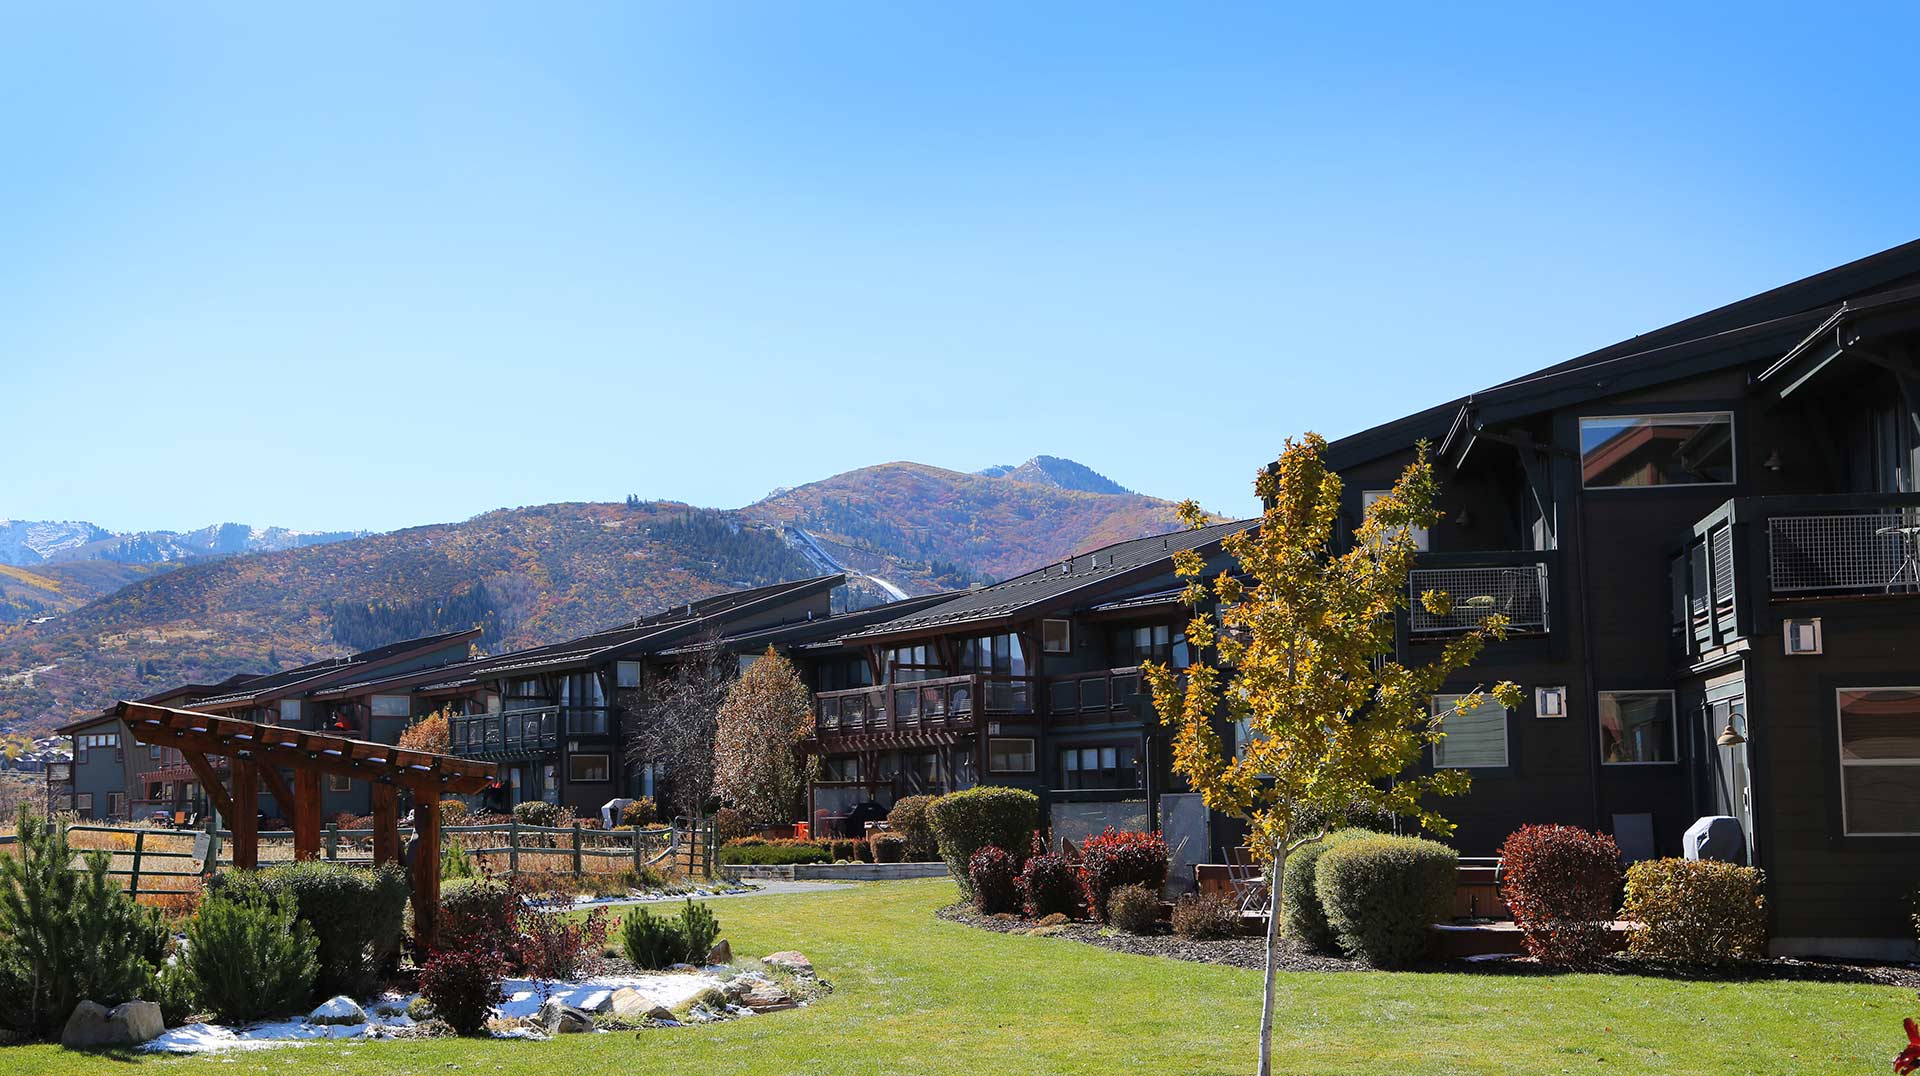 Exterior View of the Resort Buildings of our Park City Suites and Rentals.